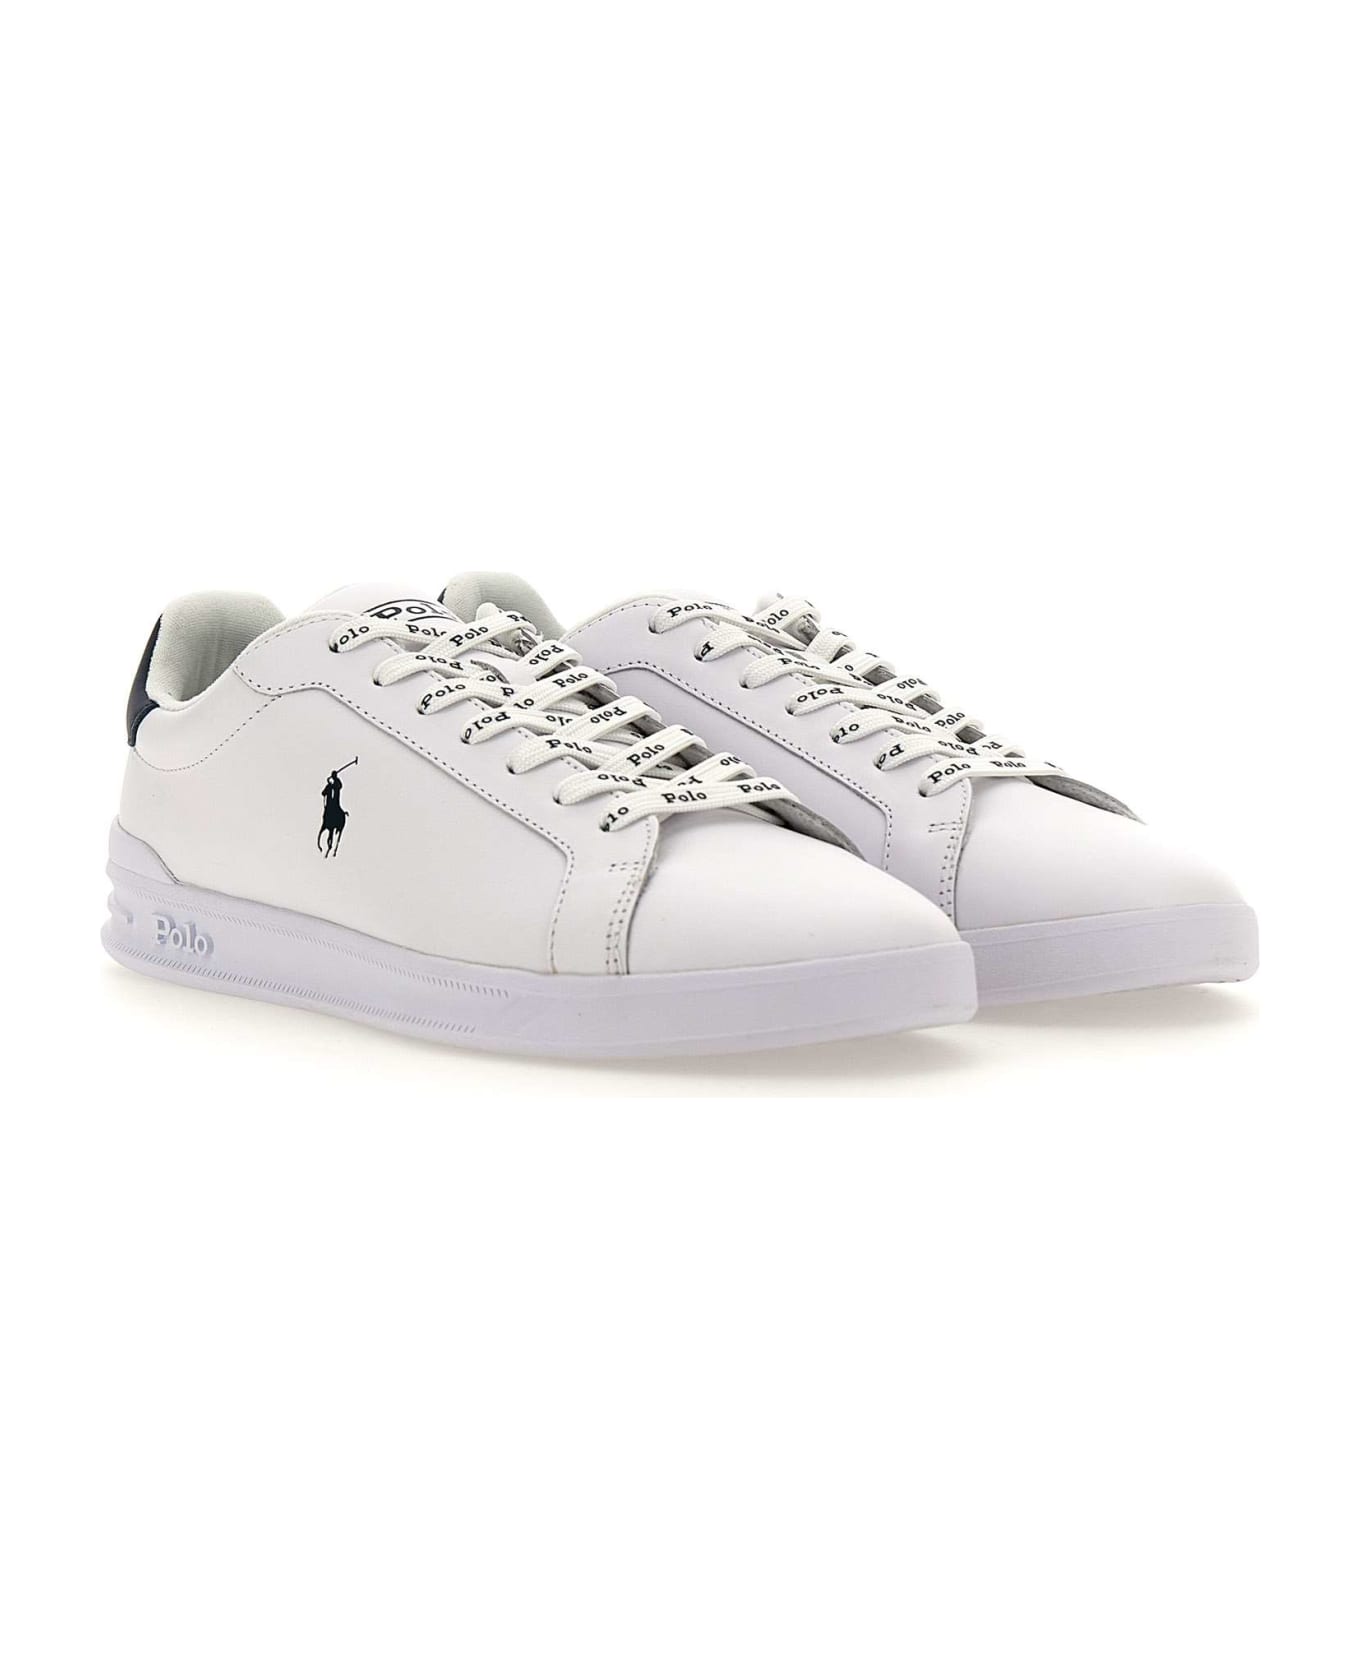 Polo Ralph Lauren "heritage Court Ii" Leather Sneakers - WHITE